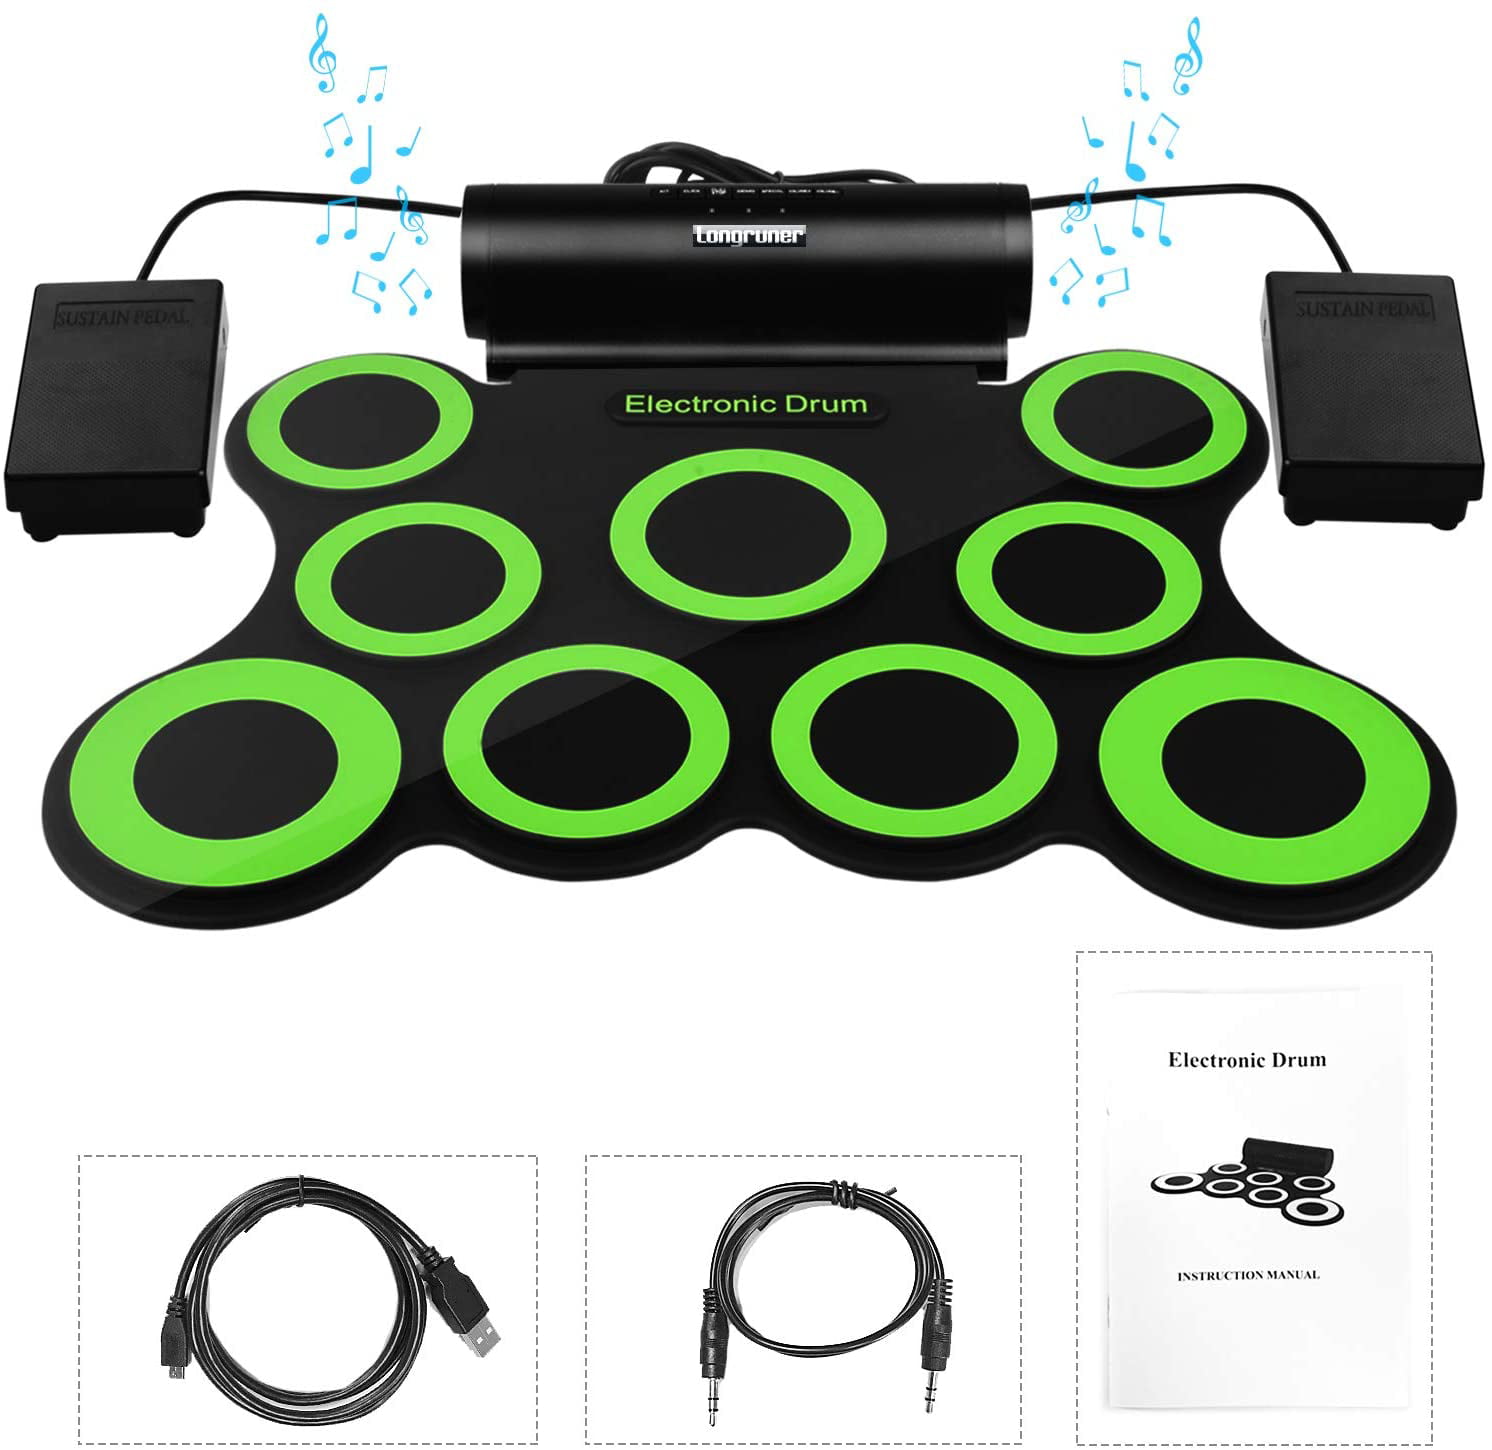 Electronic Drum Set Best Birthday Christmas Gift for Kids Children Starters 3 Drum Sticks 2 Foot Drum Pedals Headphone Jack Longruner Foldable Roll Up Drum Kit with 7 Drum Practise Pads 